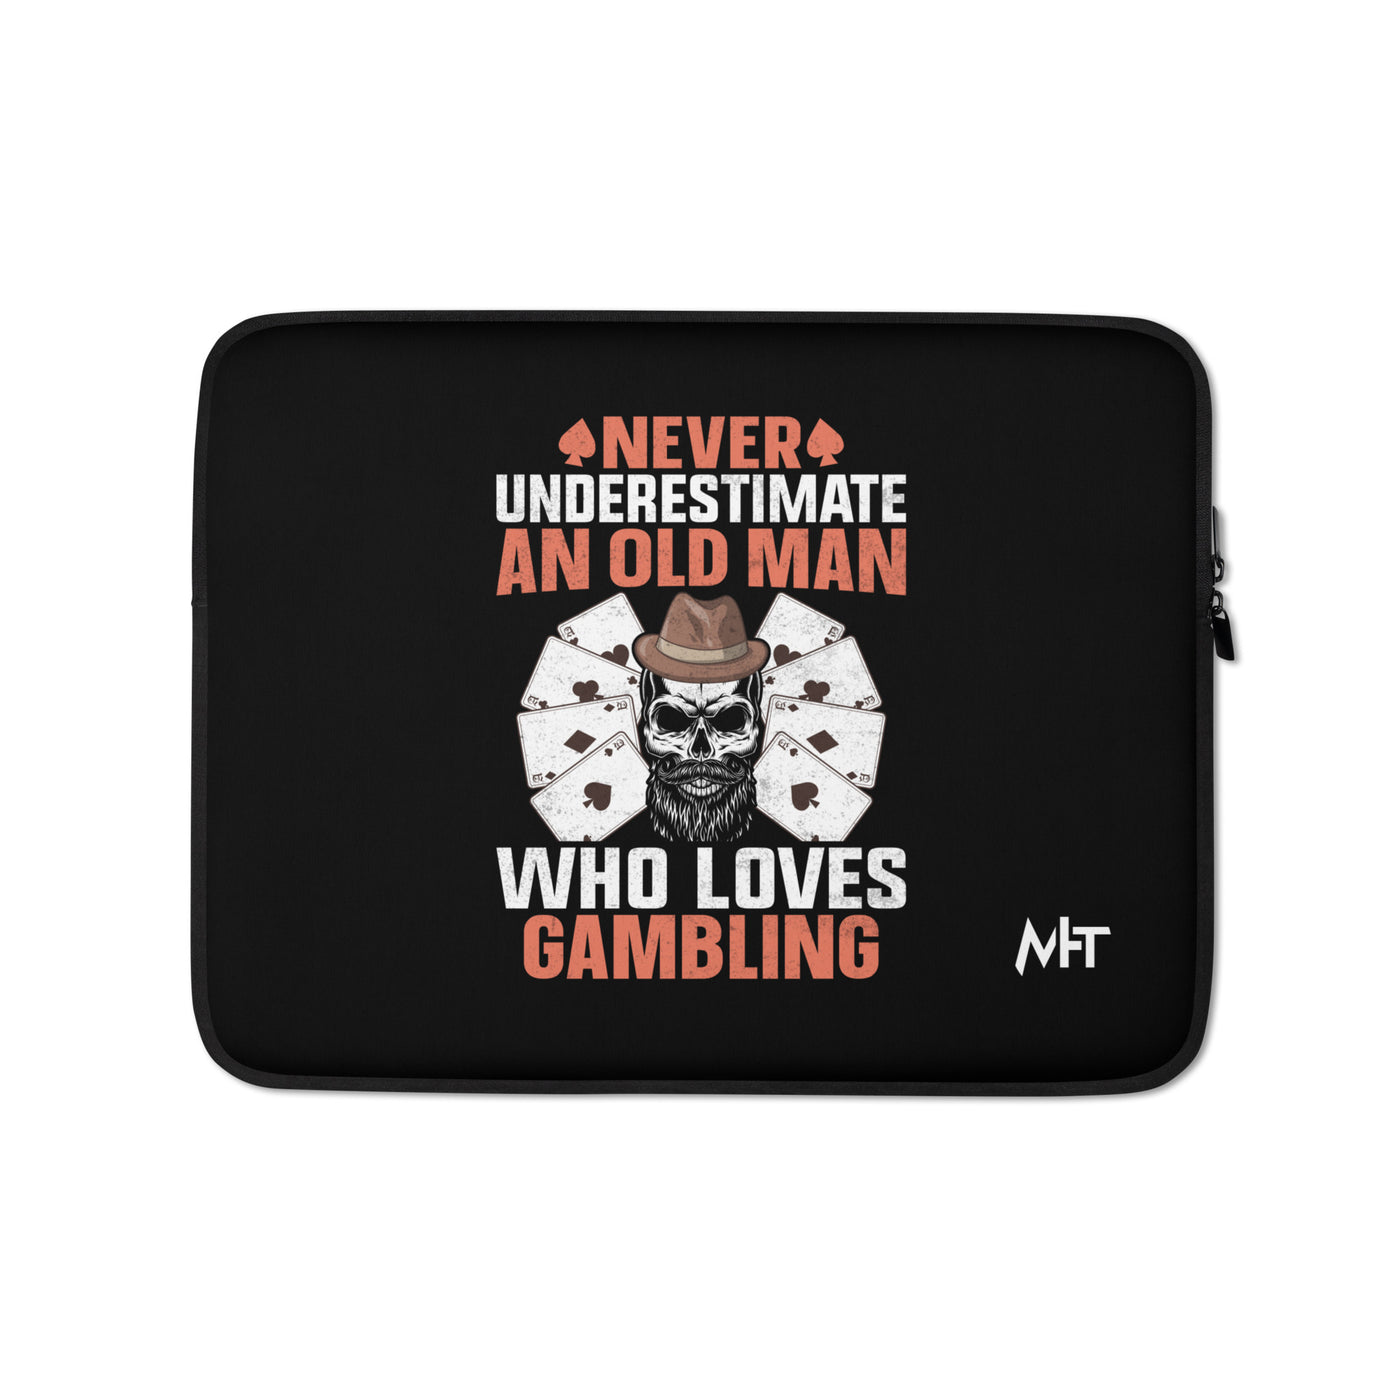 Never Underestimate an old man who Loves gambling - Laptop Sleeve